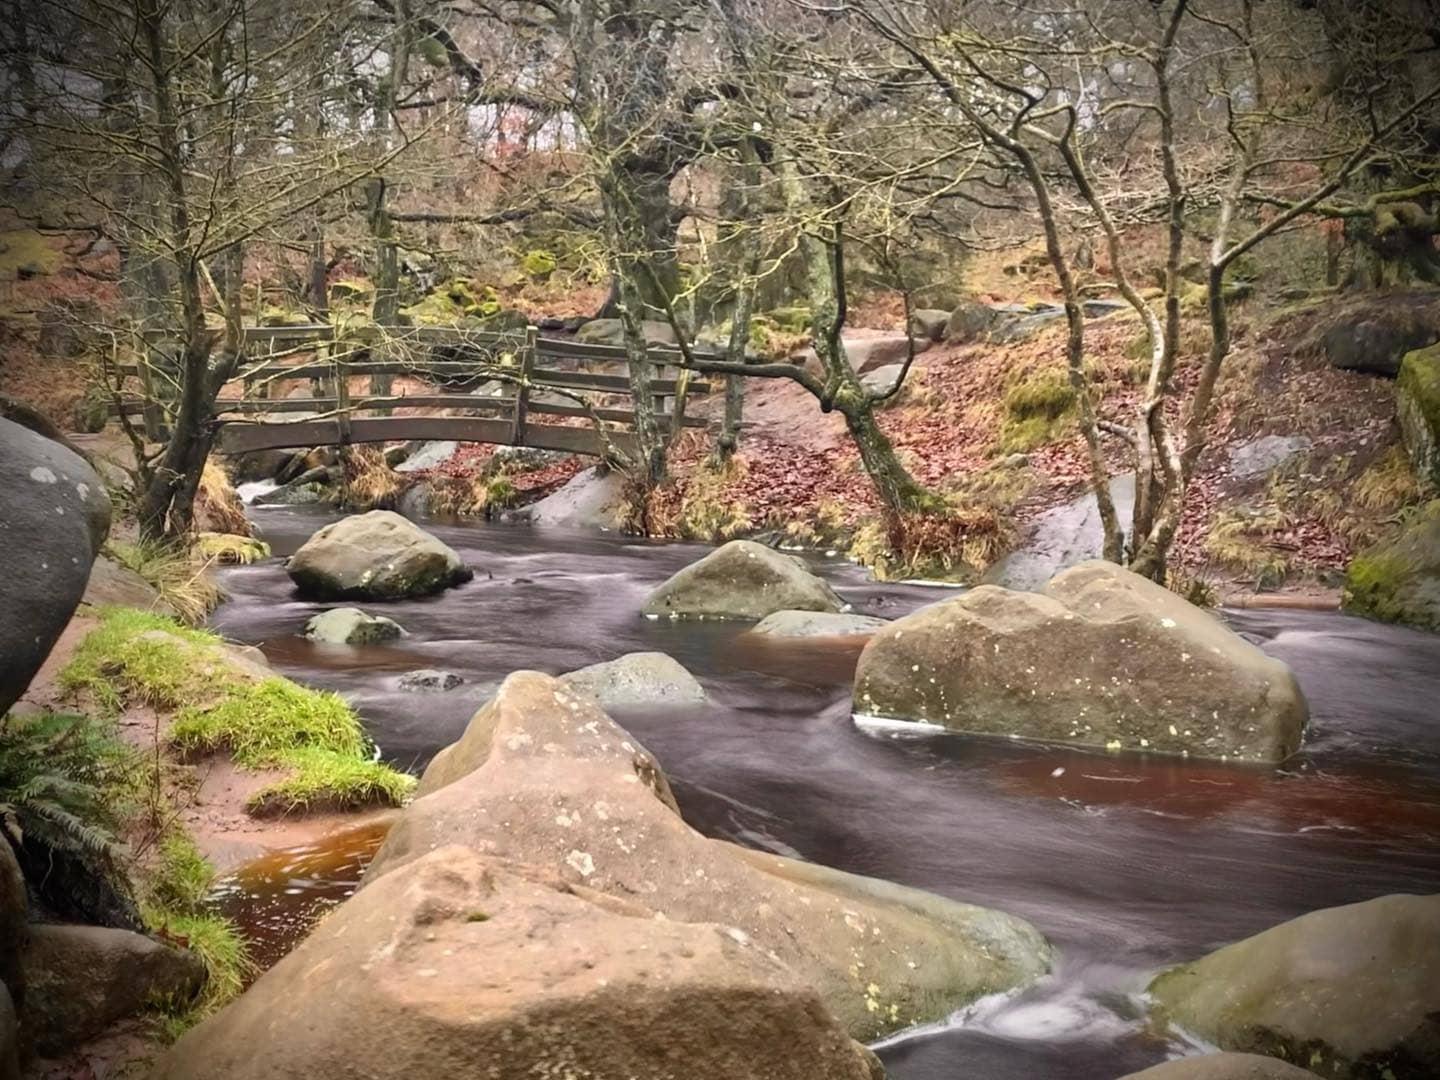 Long exposure on the water down at Padley Gorge this morning. Our Copper entrants will come throu...